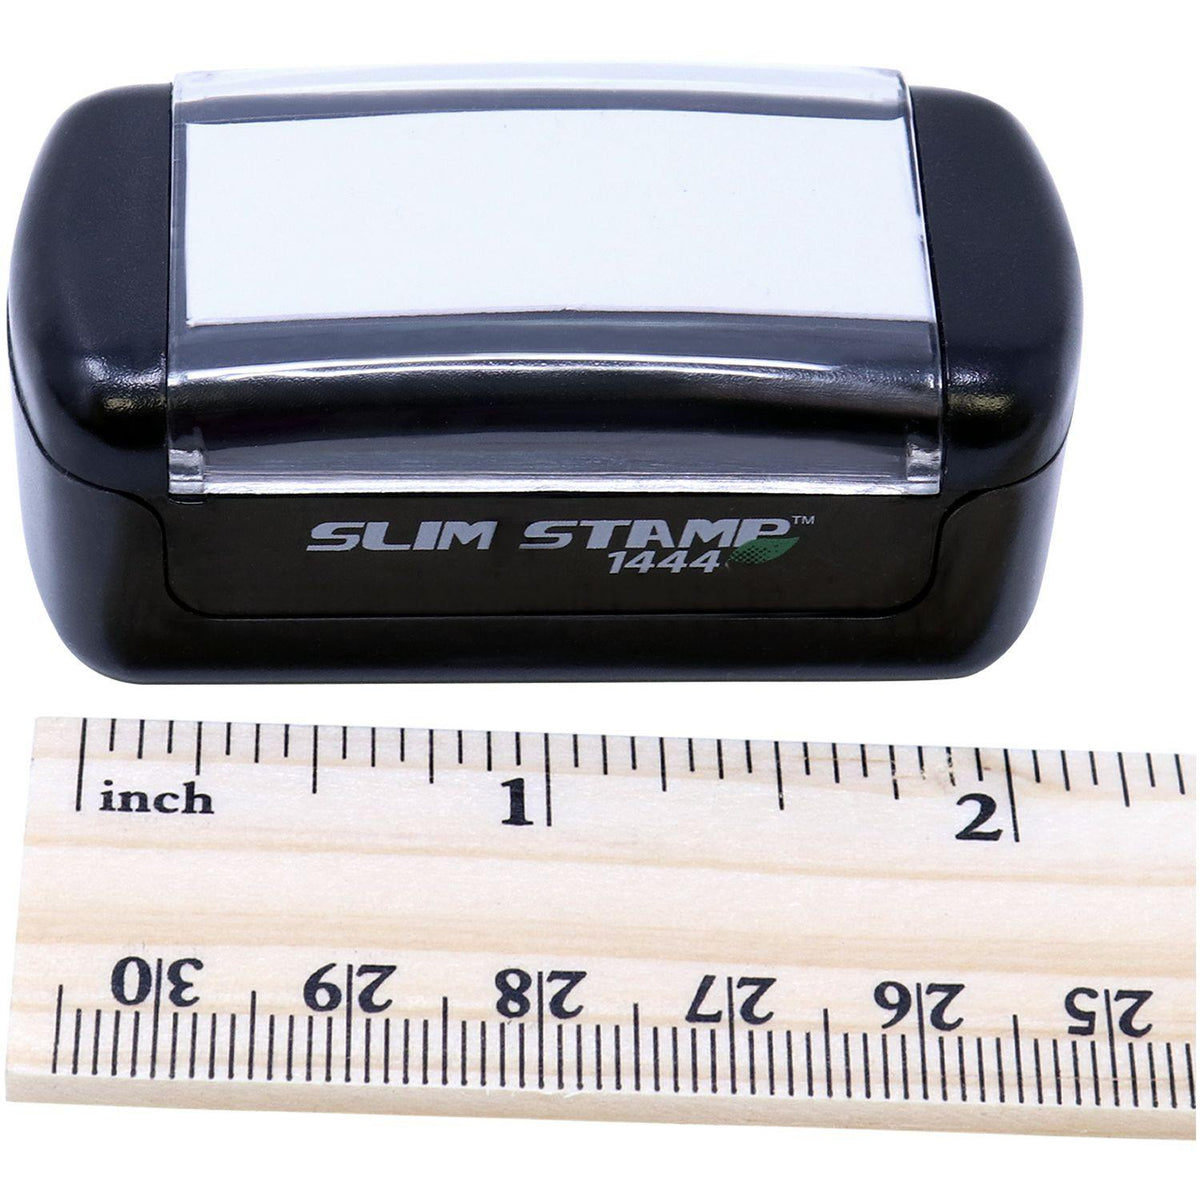 Measurement Slim Pre-Inked Faxed with Machine Stamp with Ruler